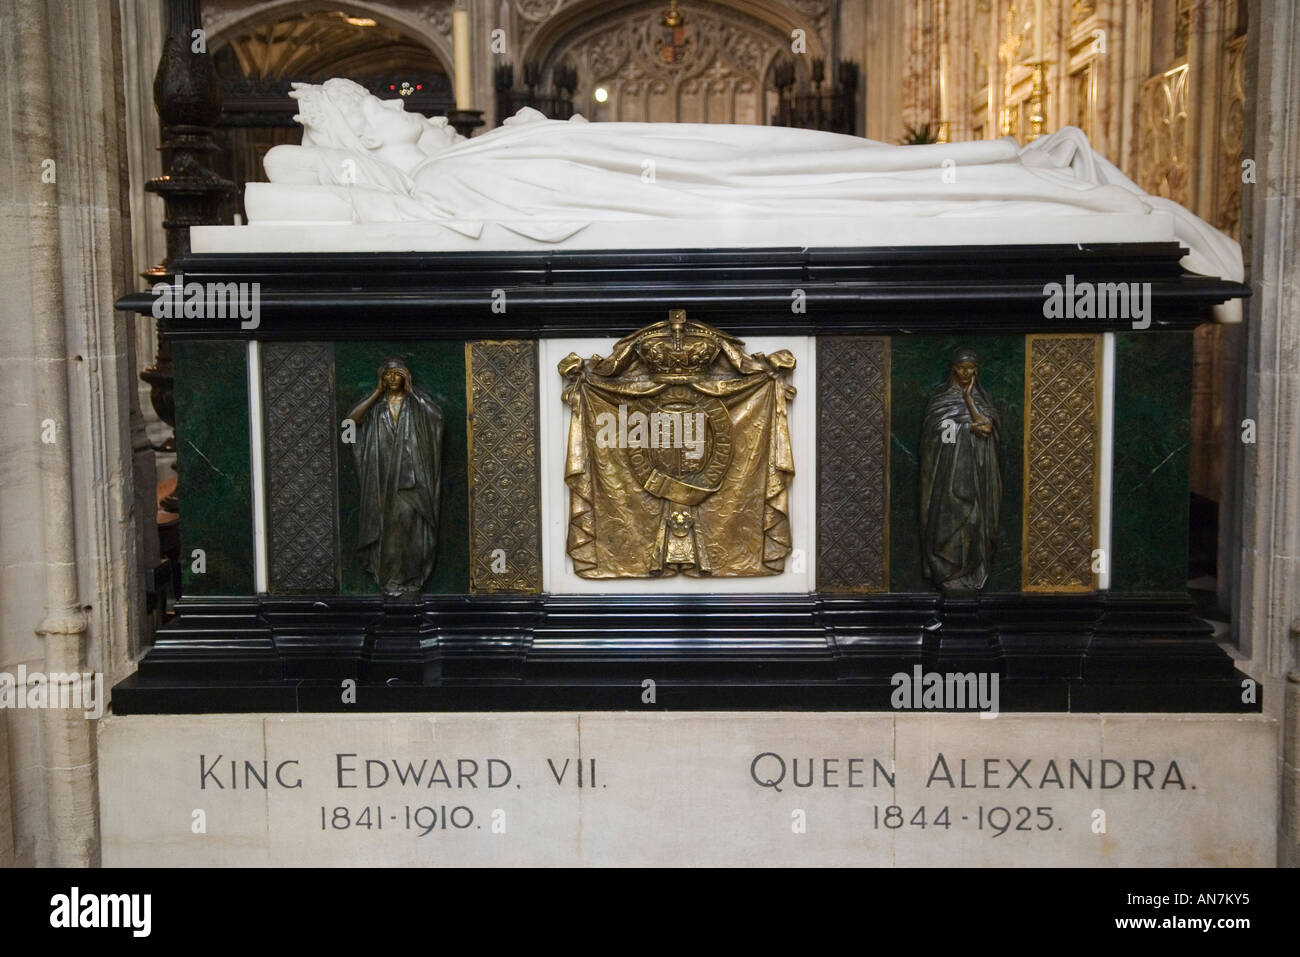 Saint St Georges Chapel Windsor Castle Berkshire, England. The tomb of King Edward V11 and Queen Alexandra. 2006 2000s UK HOMER SYKES Stock Photo